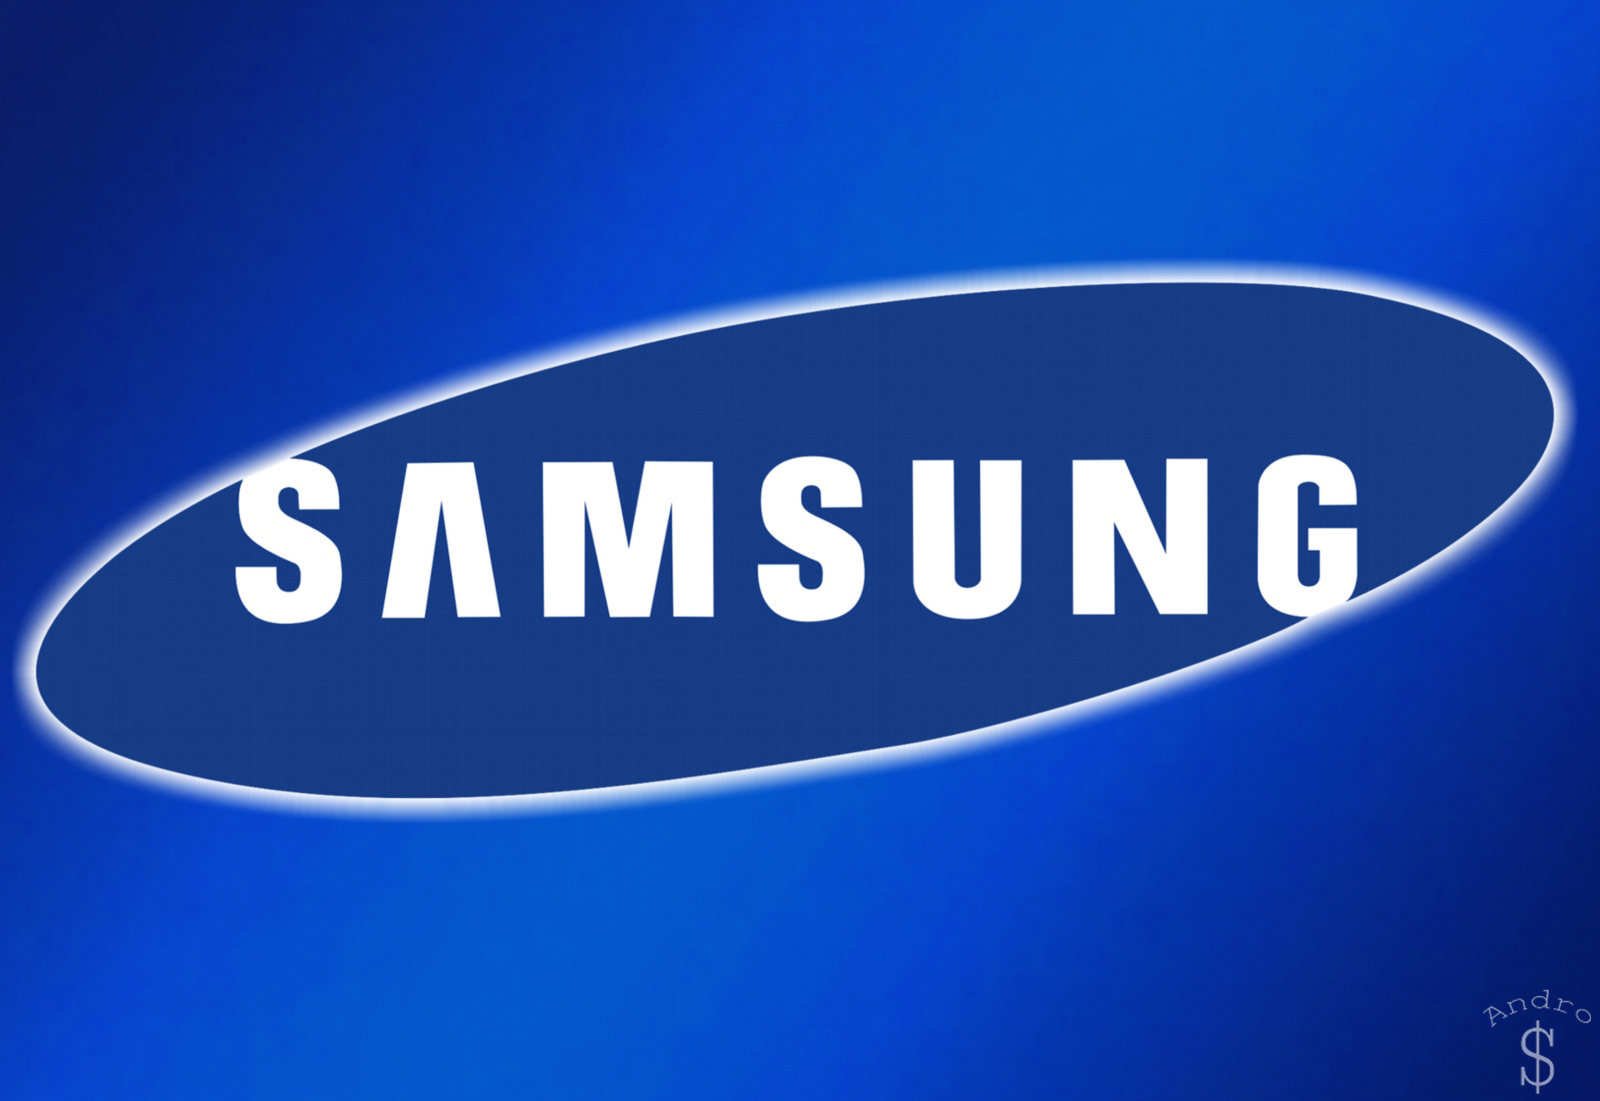 Samsung 1 - LEAKED : A New Galaxy device (SM-G900S) gets Benchmarked, 2K Display & KitKat onboard ; Sounds like the Galaxy S5